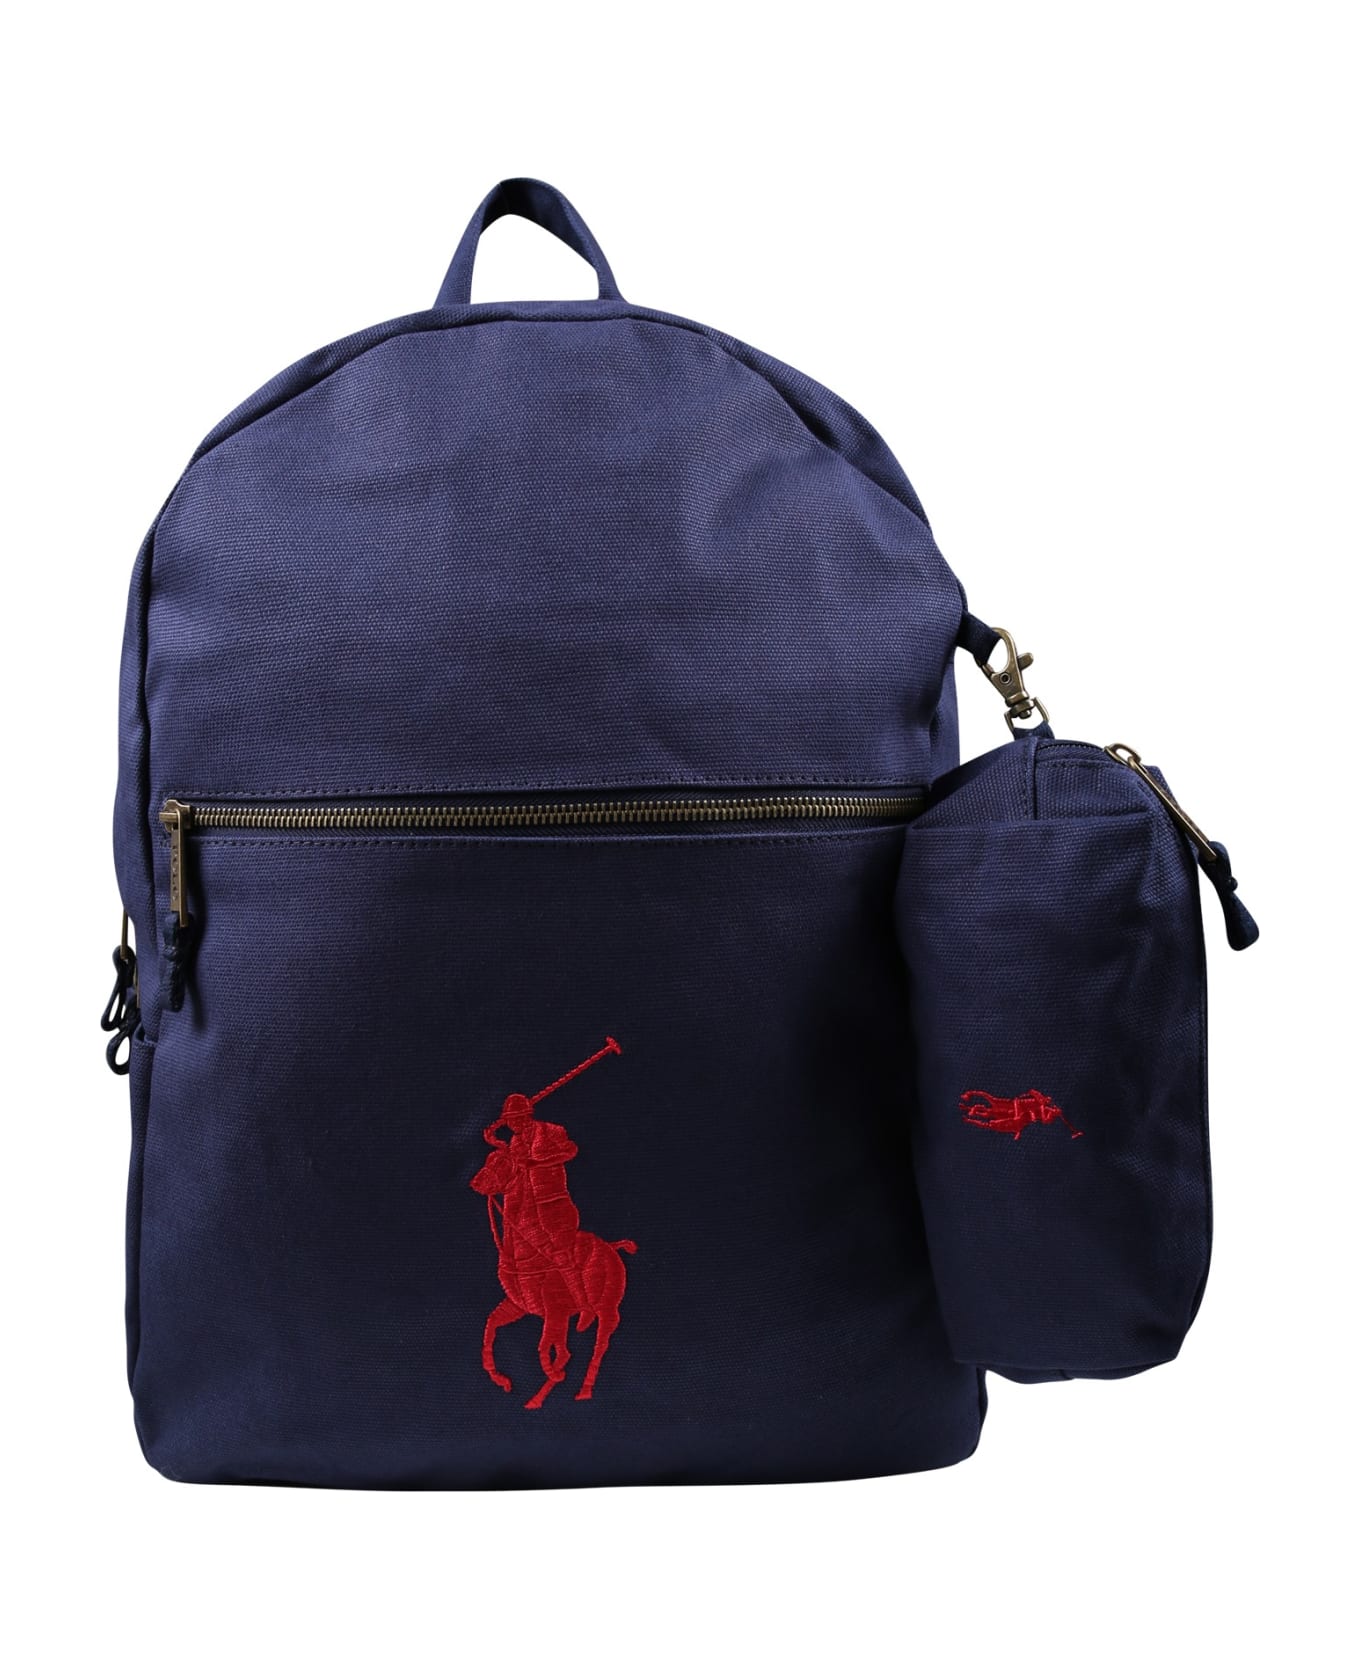 Ralph Lauren Blue Backpack For Kids With Logo - Blue アクセサリー＆ギフト